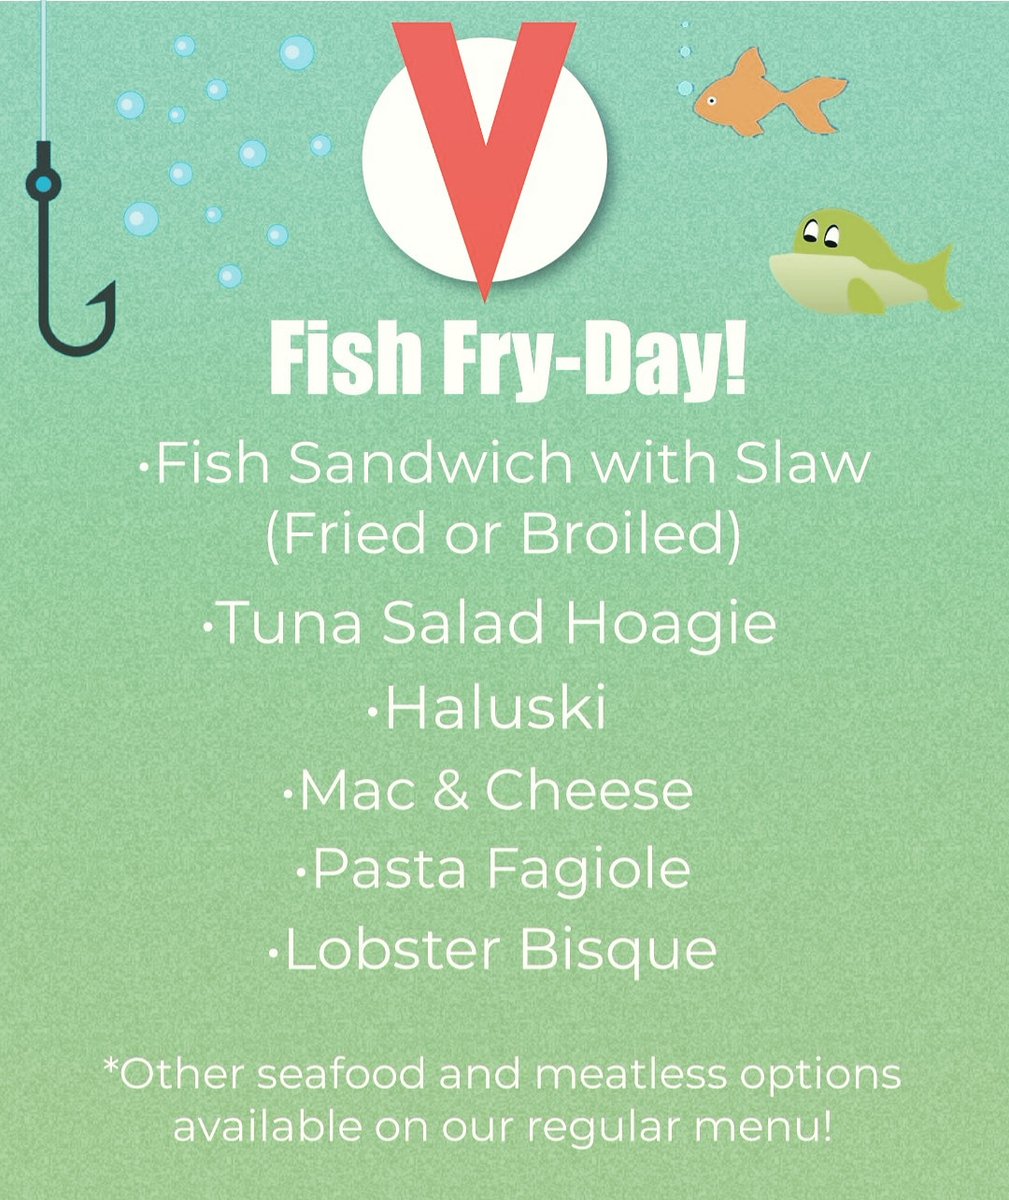 Happy Fry-day! Our Friday Lent specials are served all day for dine-in, takeout, or delivery! #fishfry #fishfryday #localeats #pittsburghfishfrys #pittsburghfood #pittsburgh #specials #fridayspecial #fishsandwich #fish